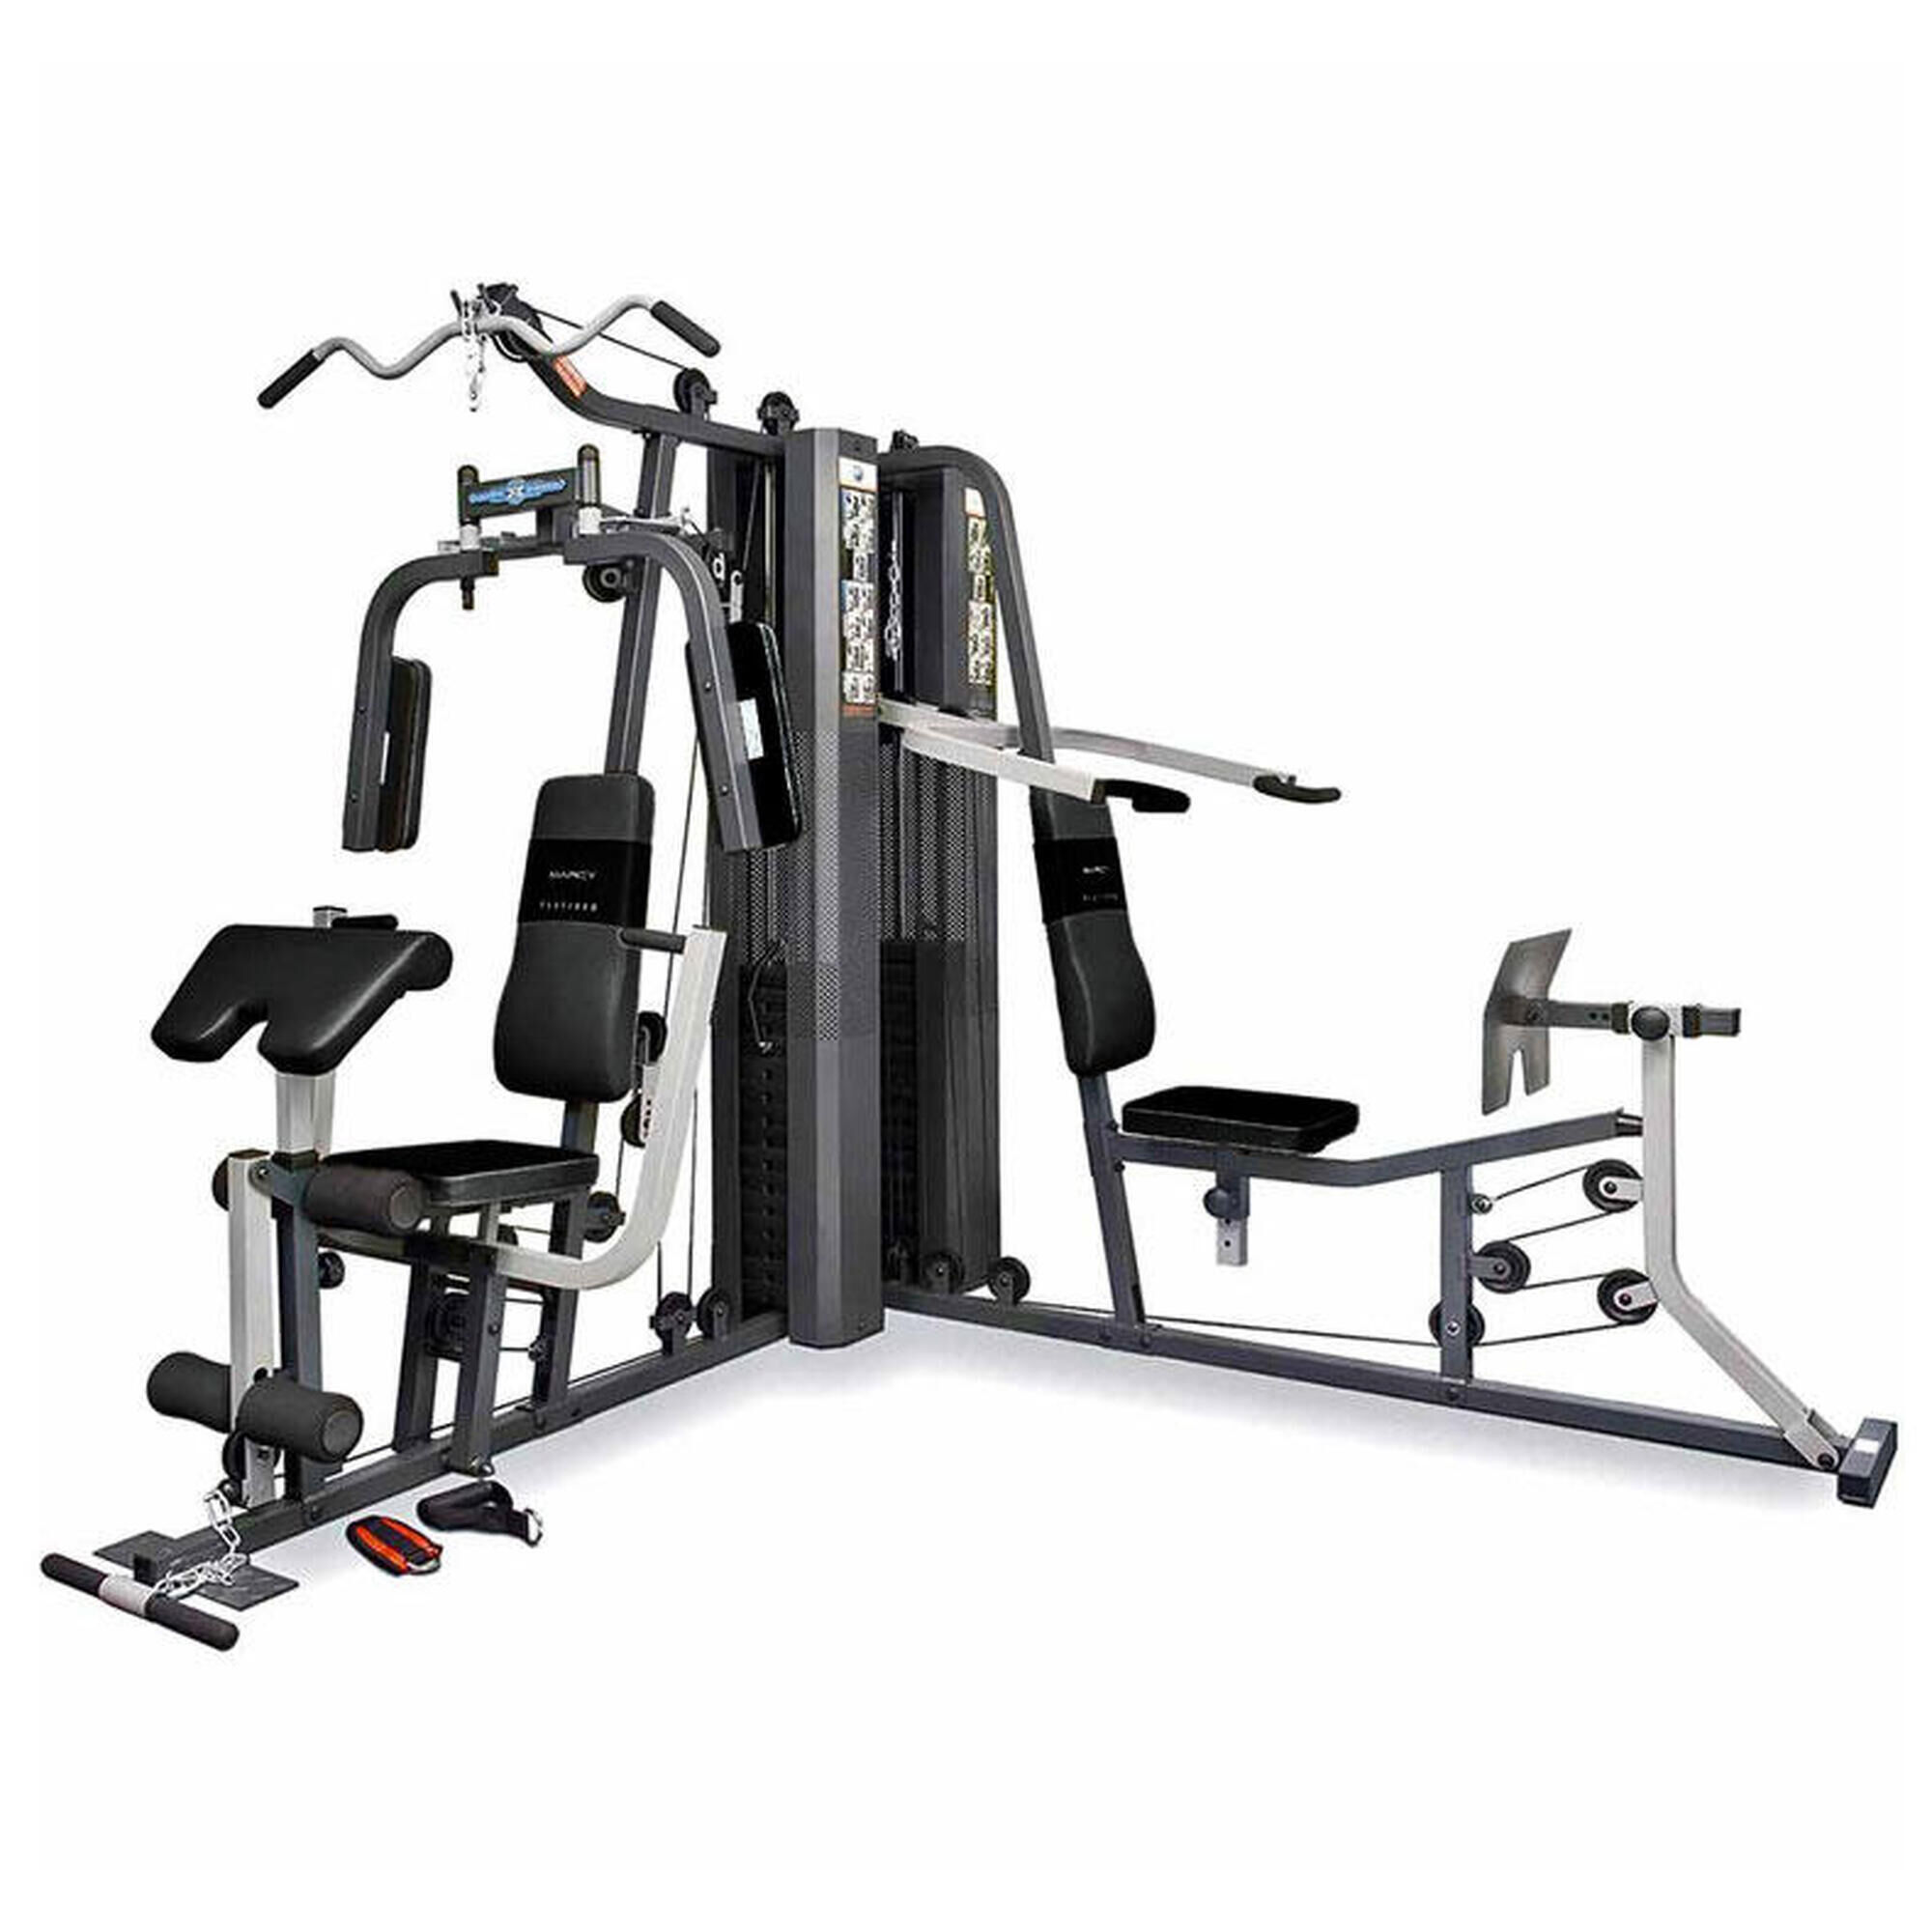 MARCY MARCY GS99 DUAL STACK HOME CORNER MULTI GYM